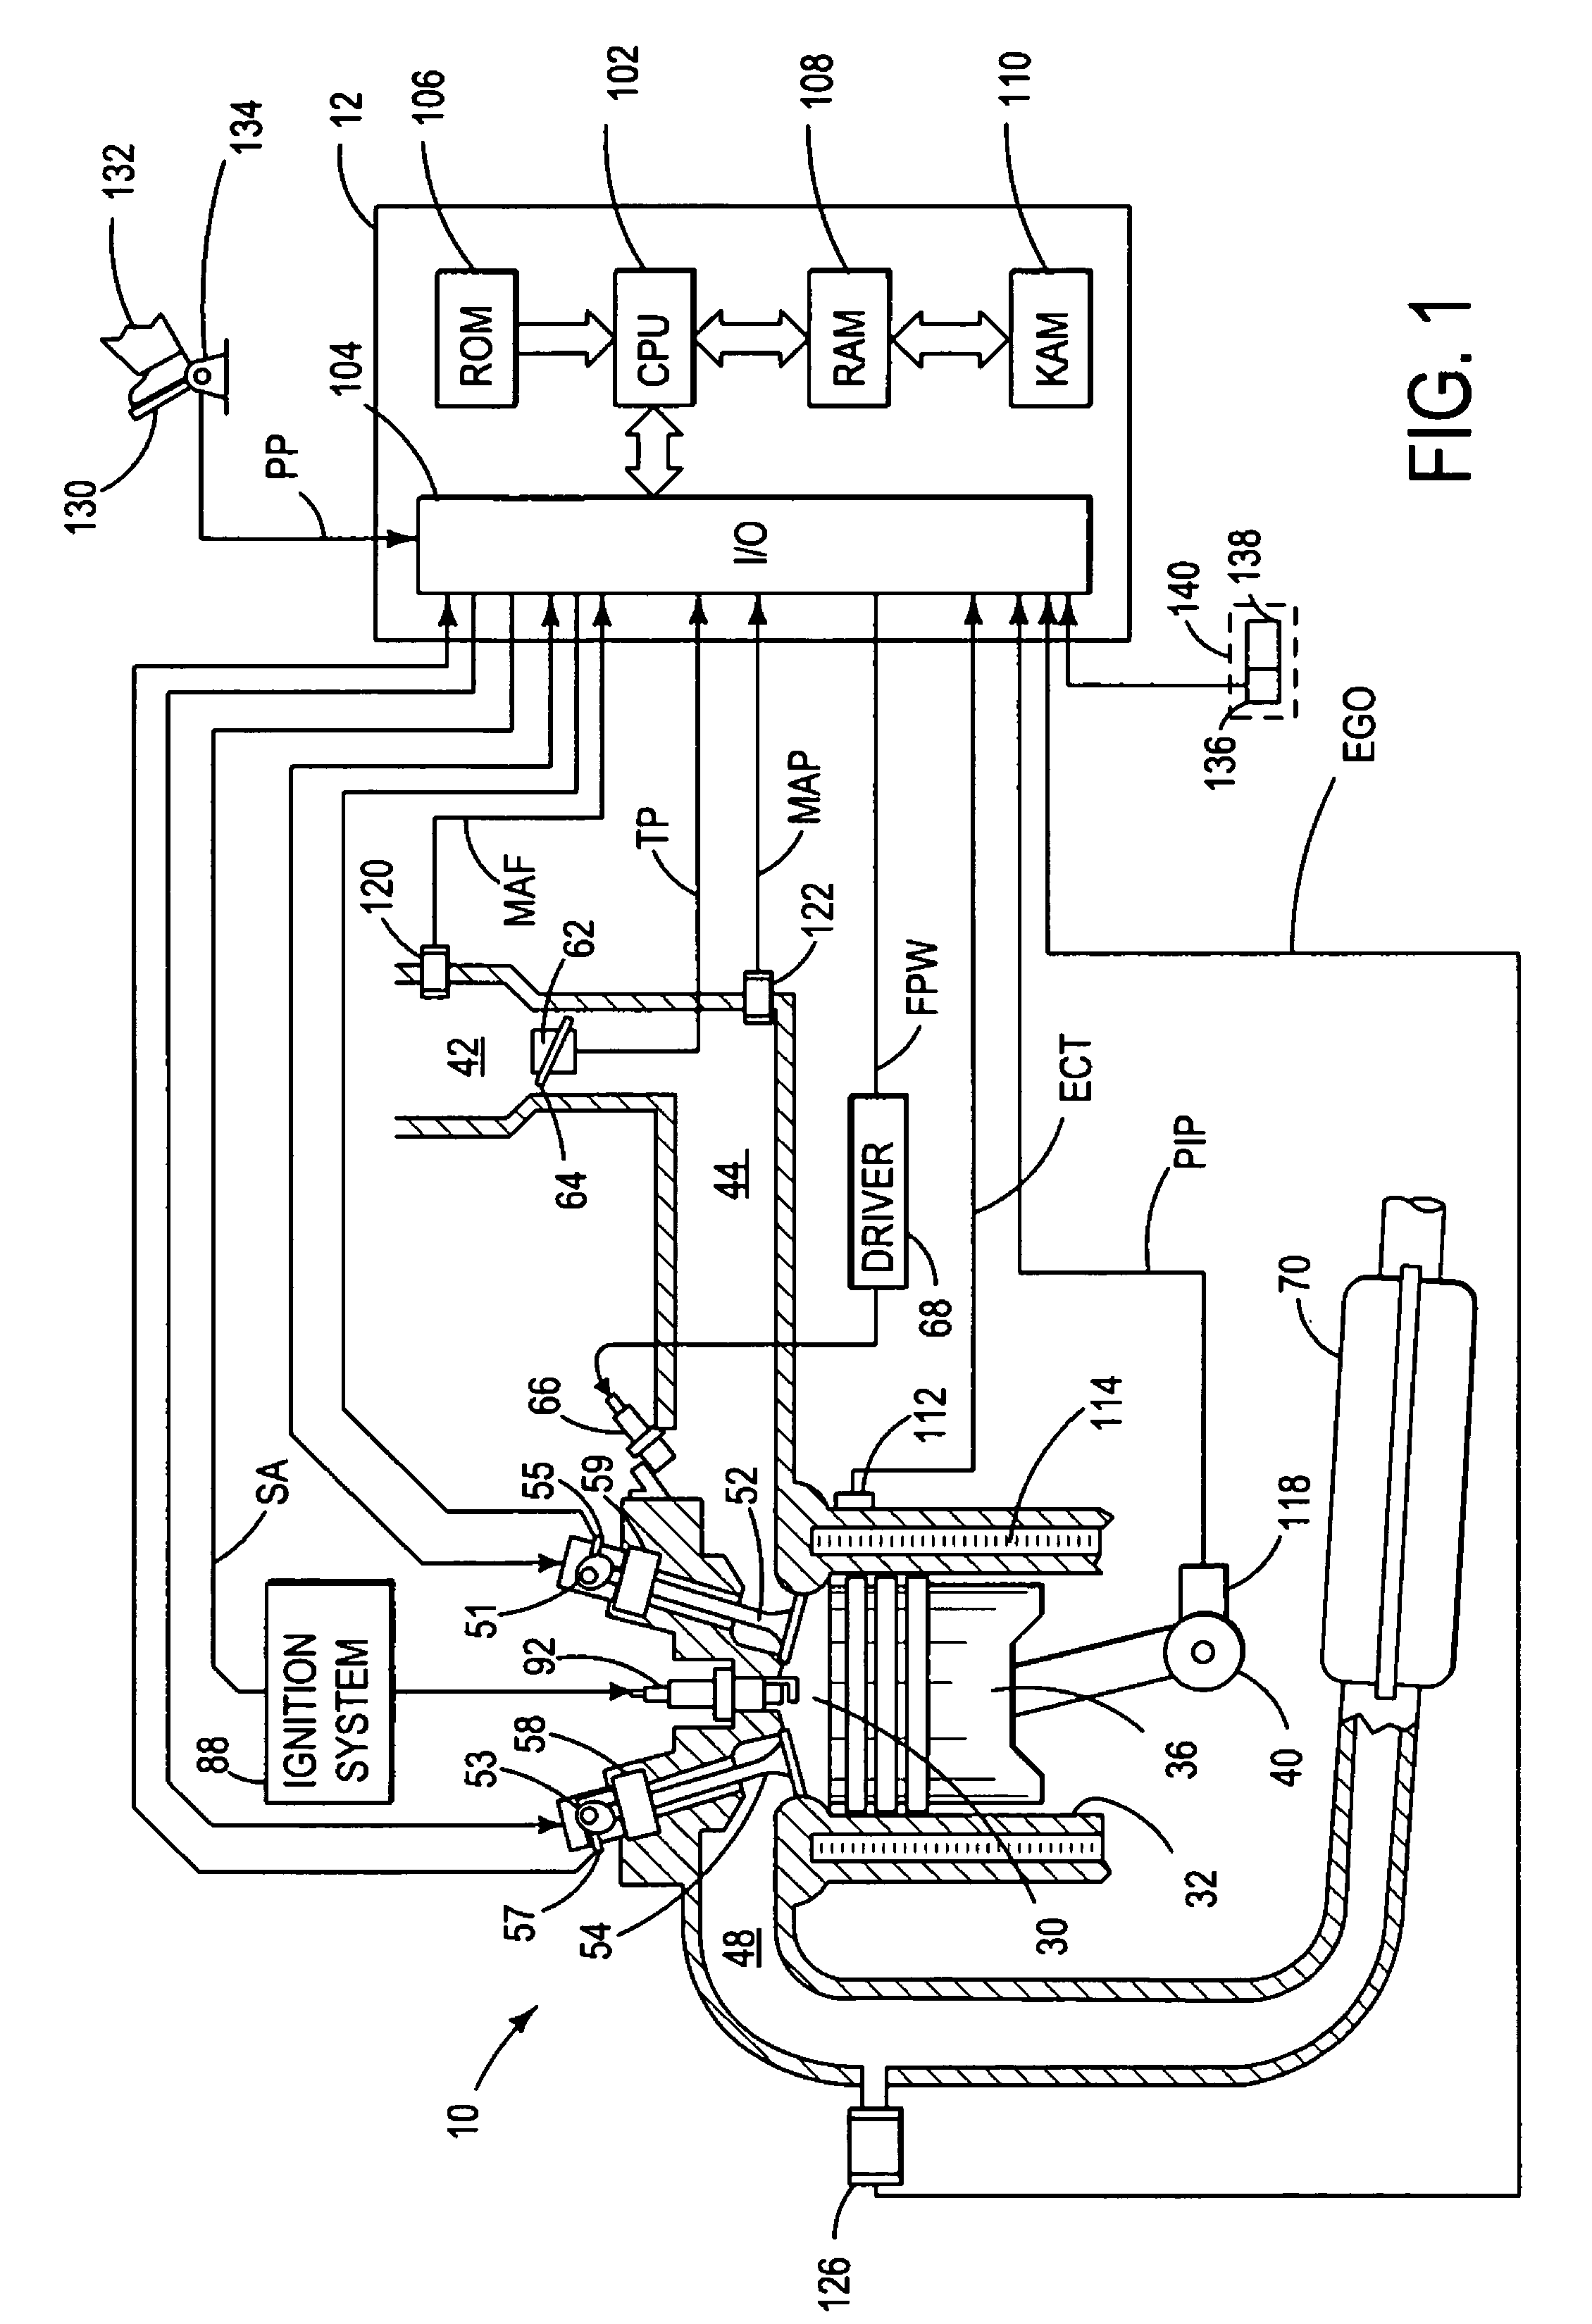 Approach for adaptive control of cam profile switching for combustion mode transitions